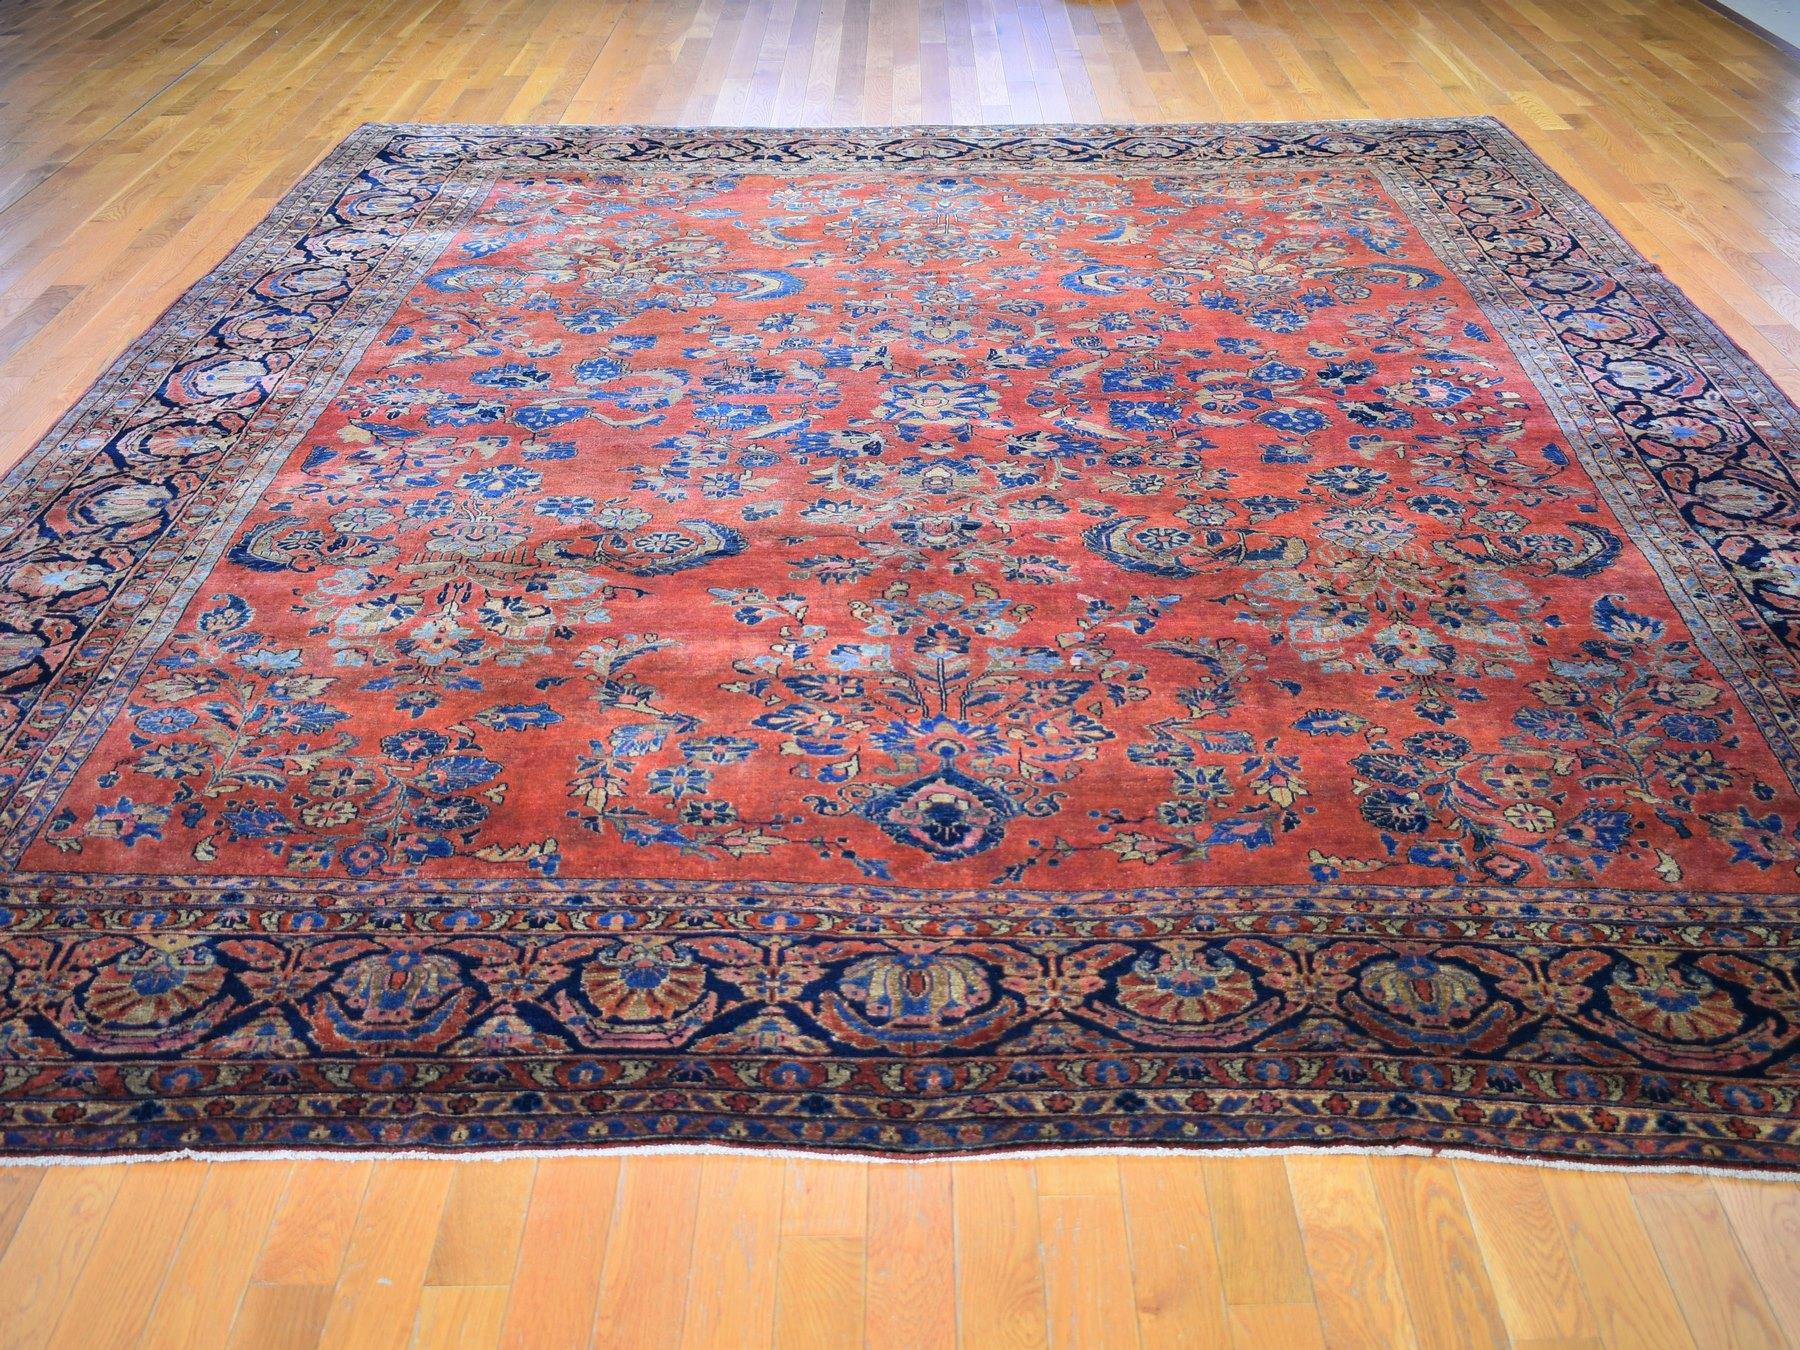 Medieval Red Antique Persian Sarouk Even Wear Clean And Soft Hand Knotted Oriental Rug